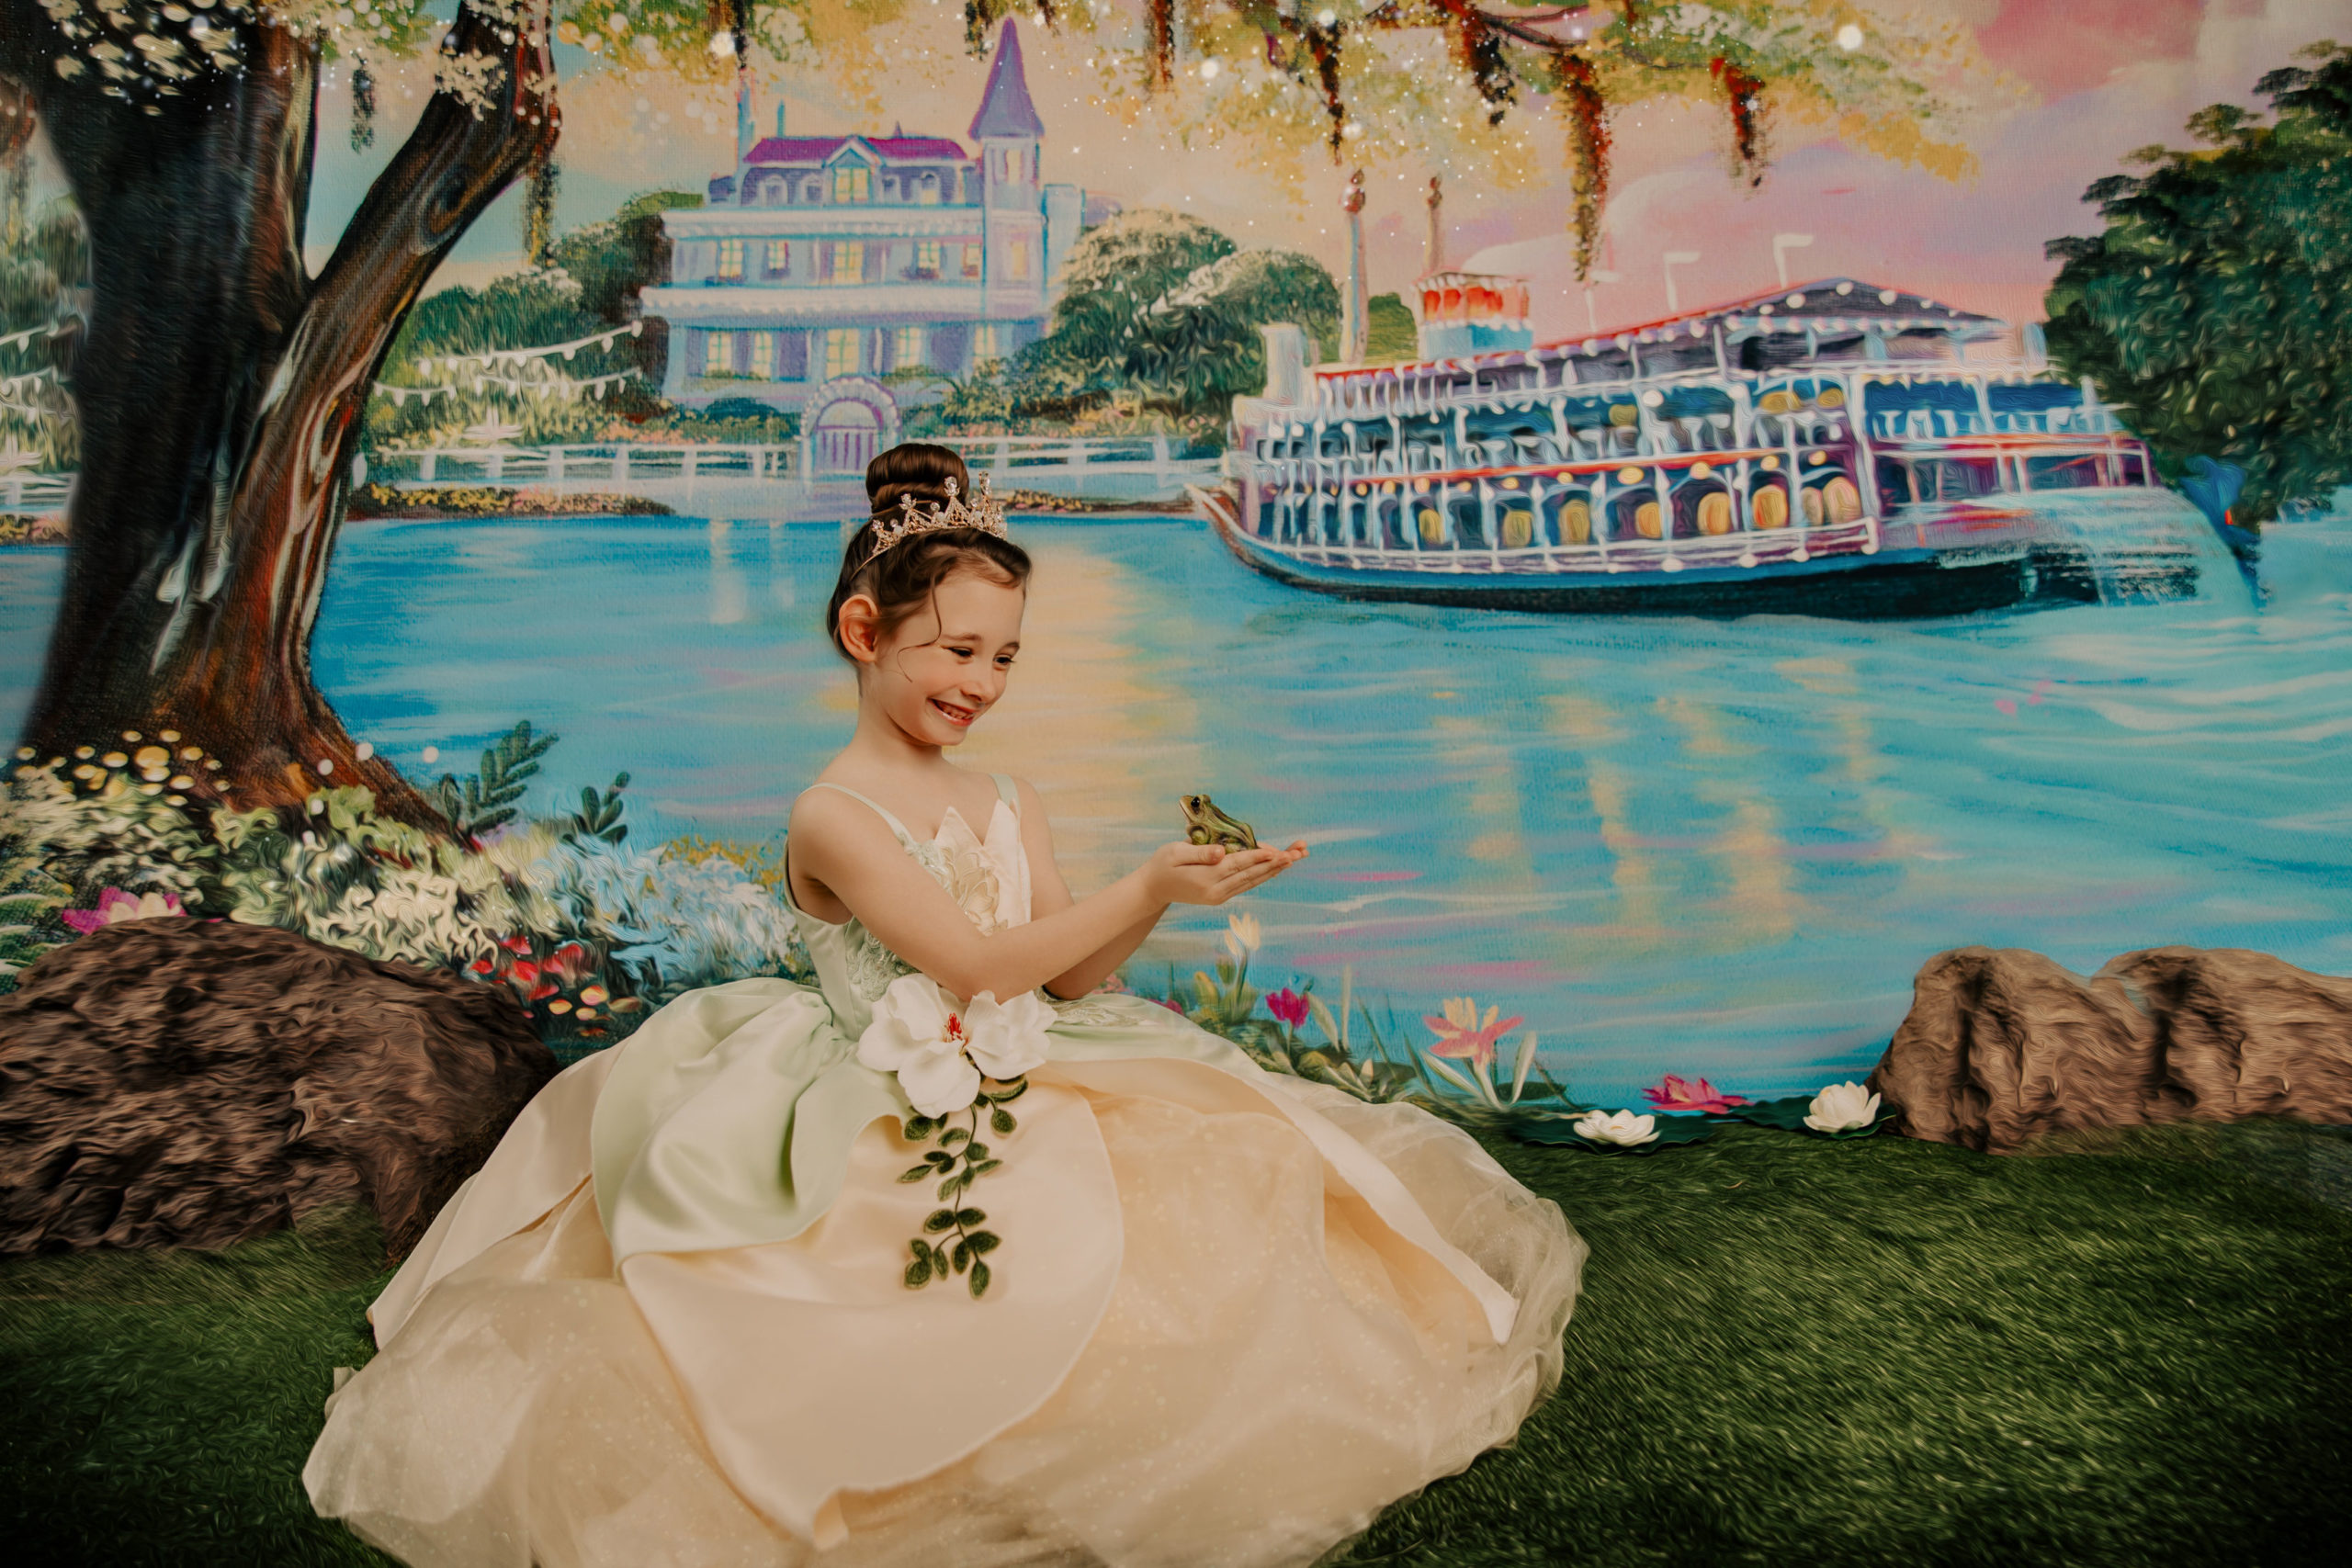 Princess and the frog inspired scene with a girl in a yellow and green dress holding a frog